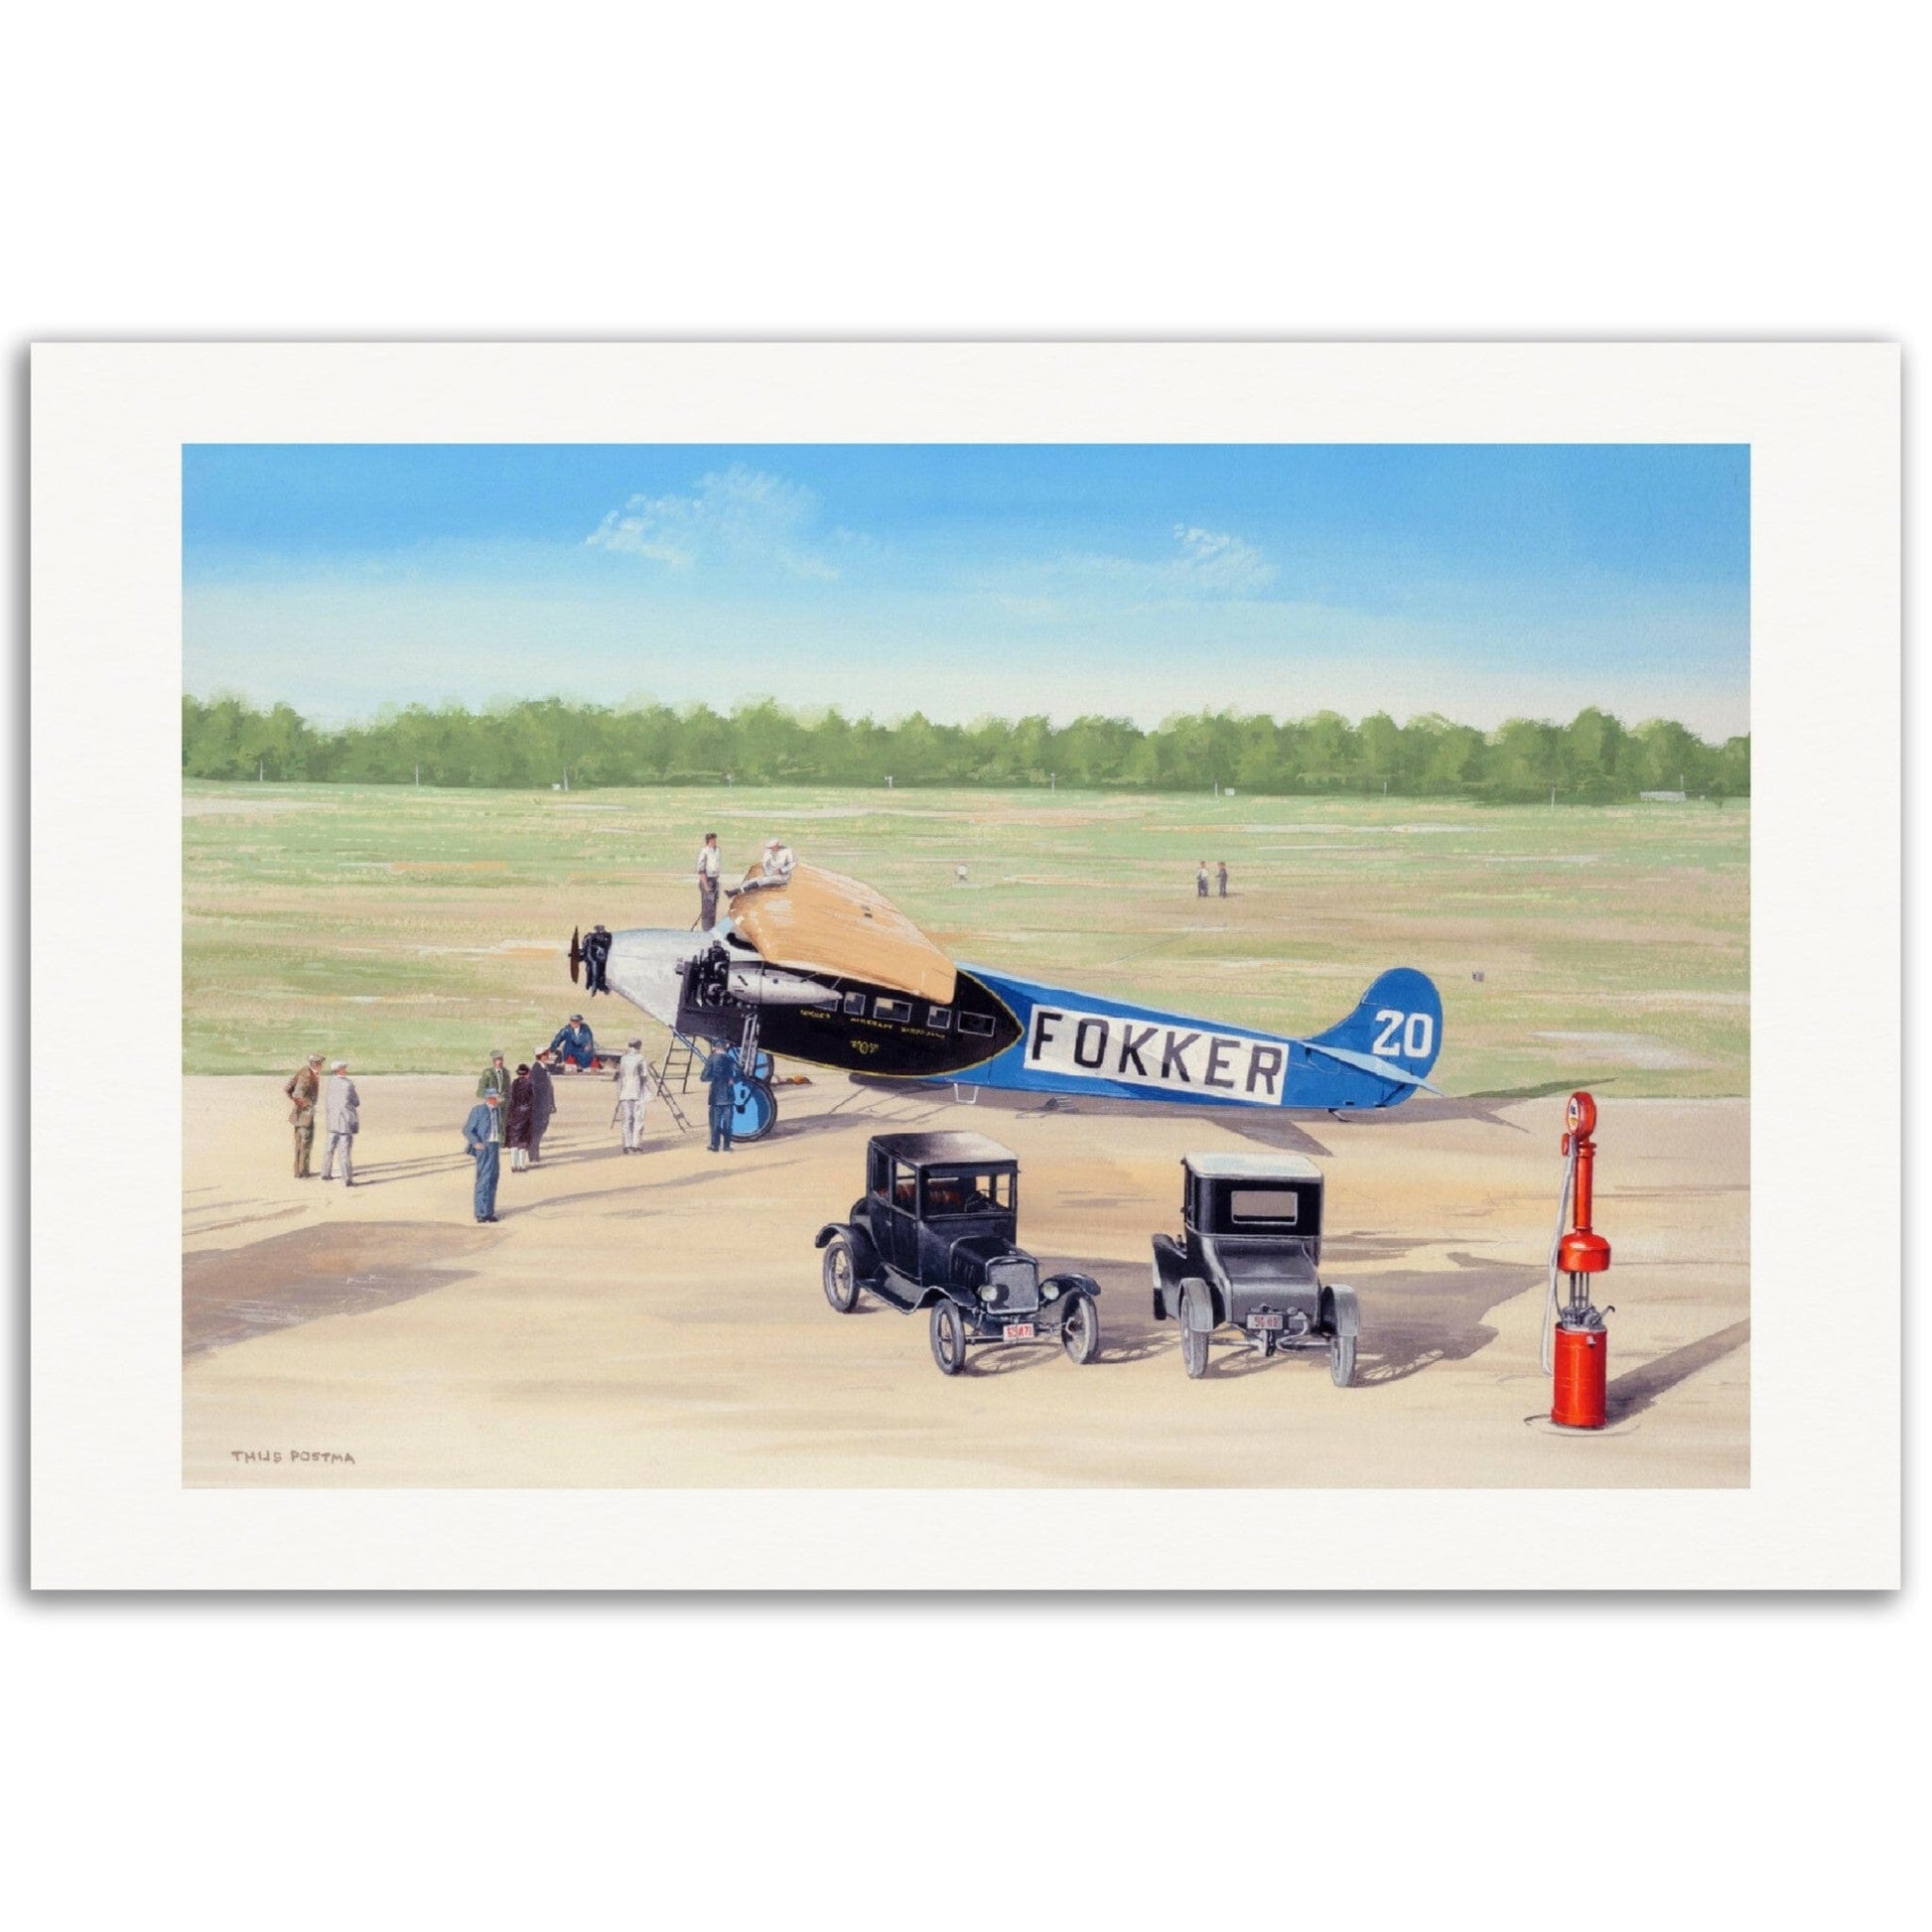 Thijs Postma - Poster - Fokker F.7/3m During Ford Reliability Tour Poster Only TP Aviation Art 